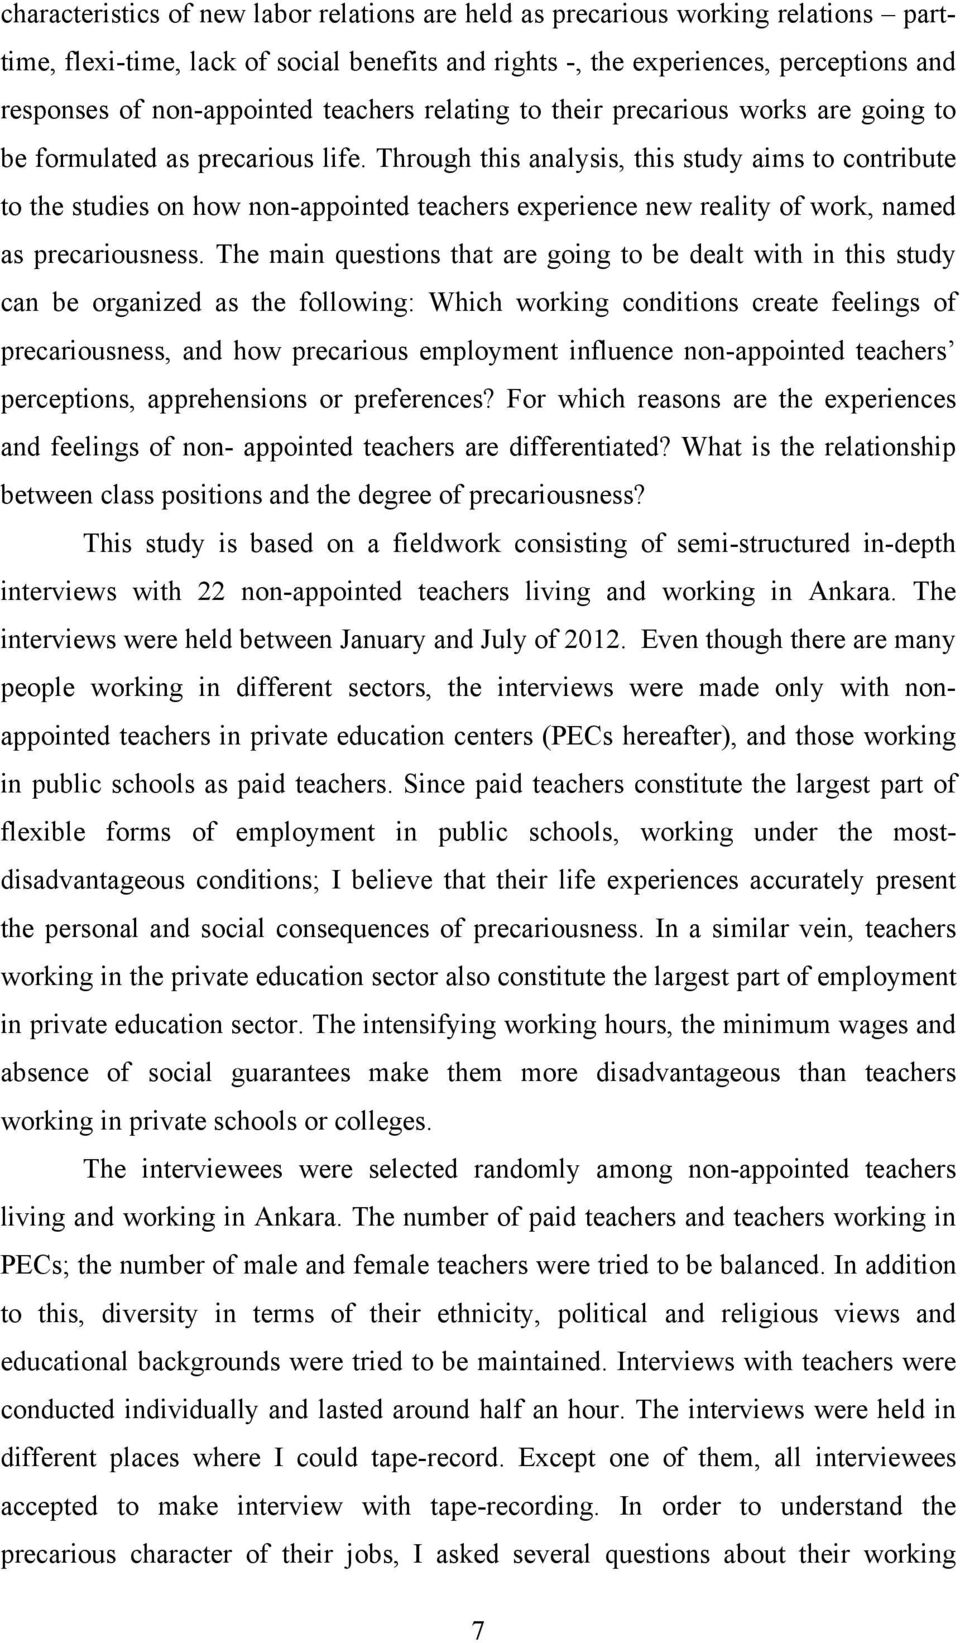 Through this analysis, this study aims to contribute to the studies on how non-appointed teachers experience new reality of work, named as precariousness.